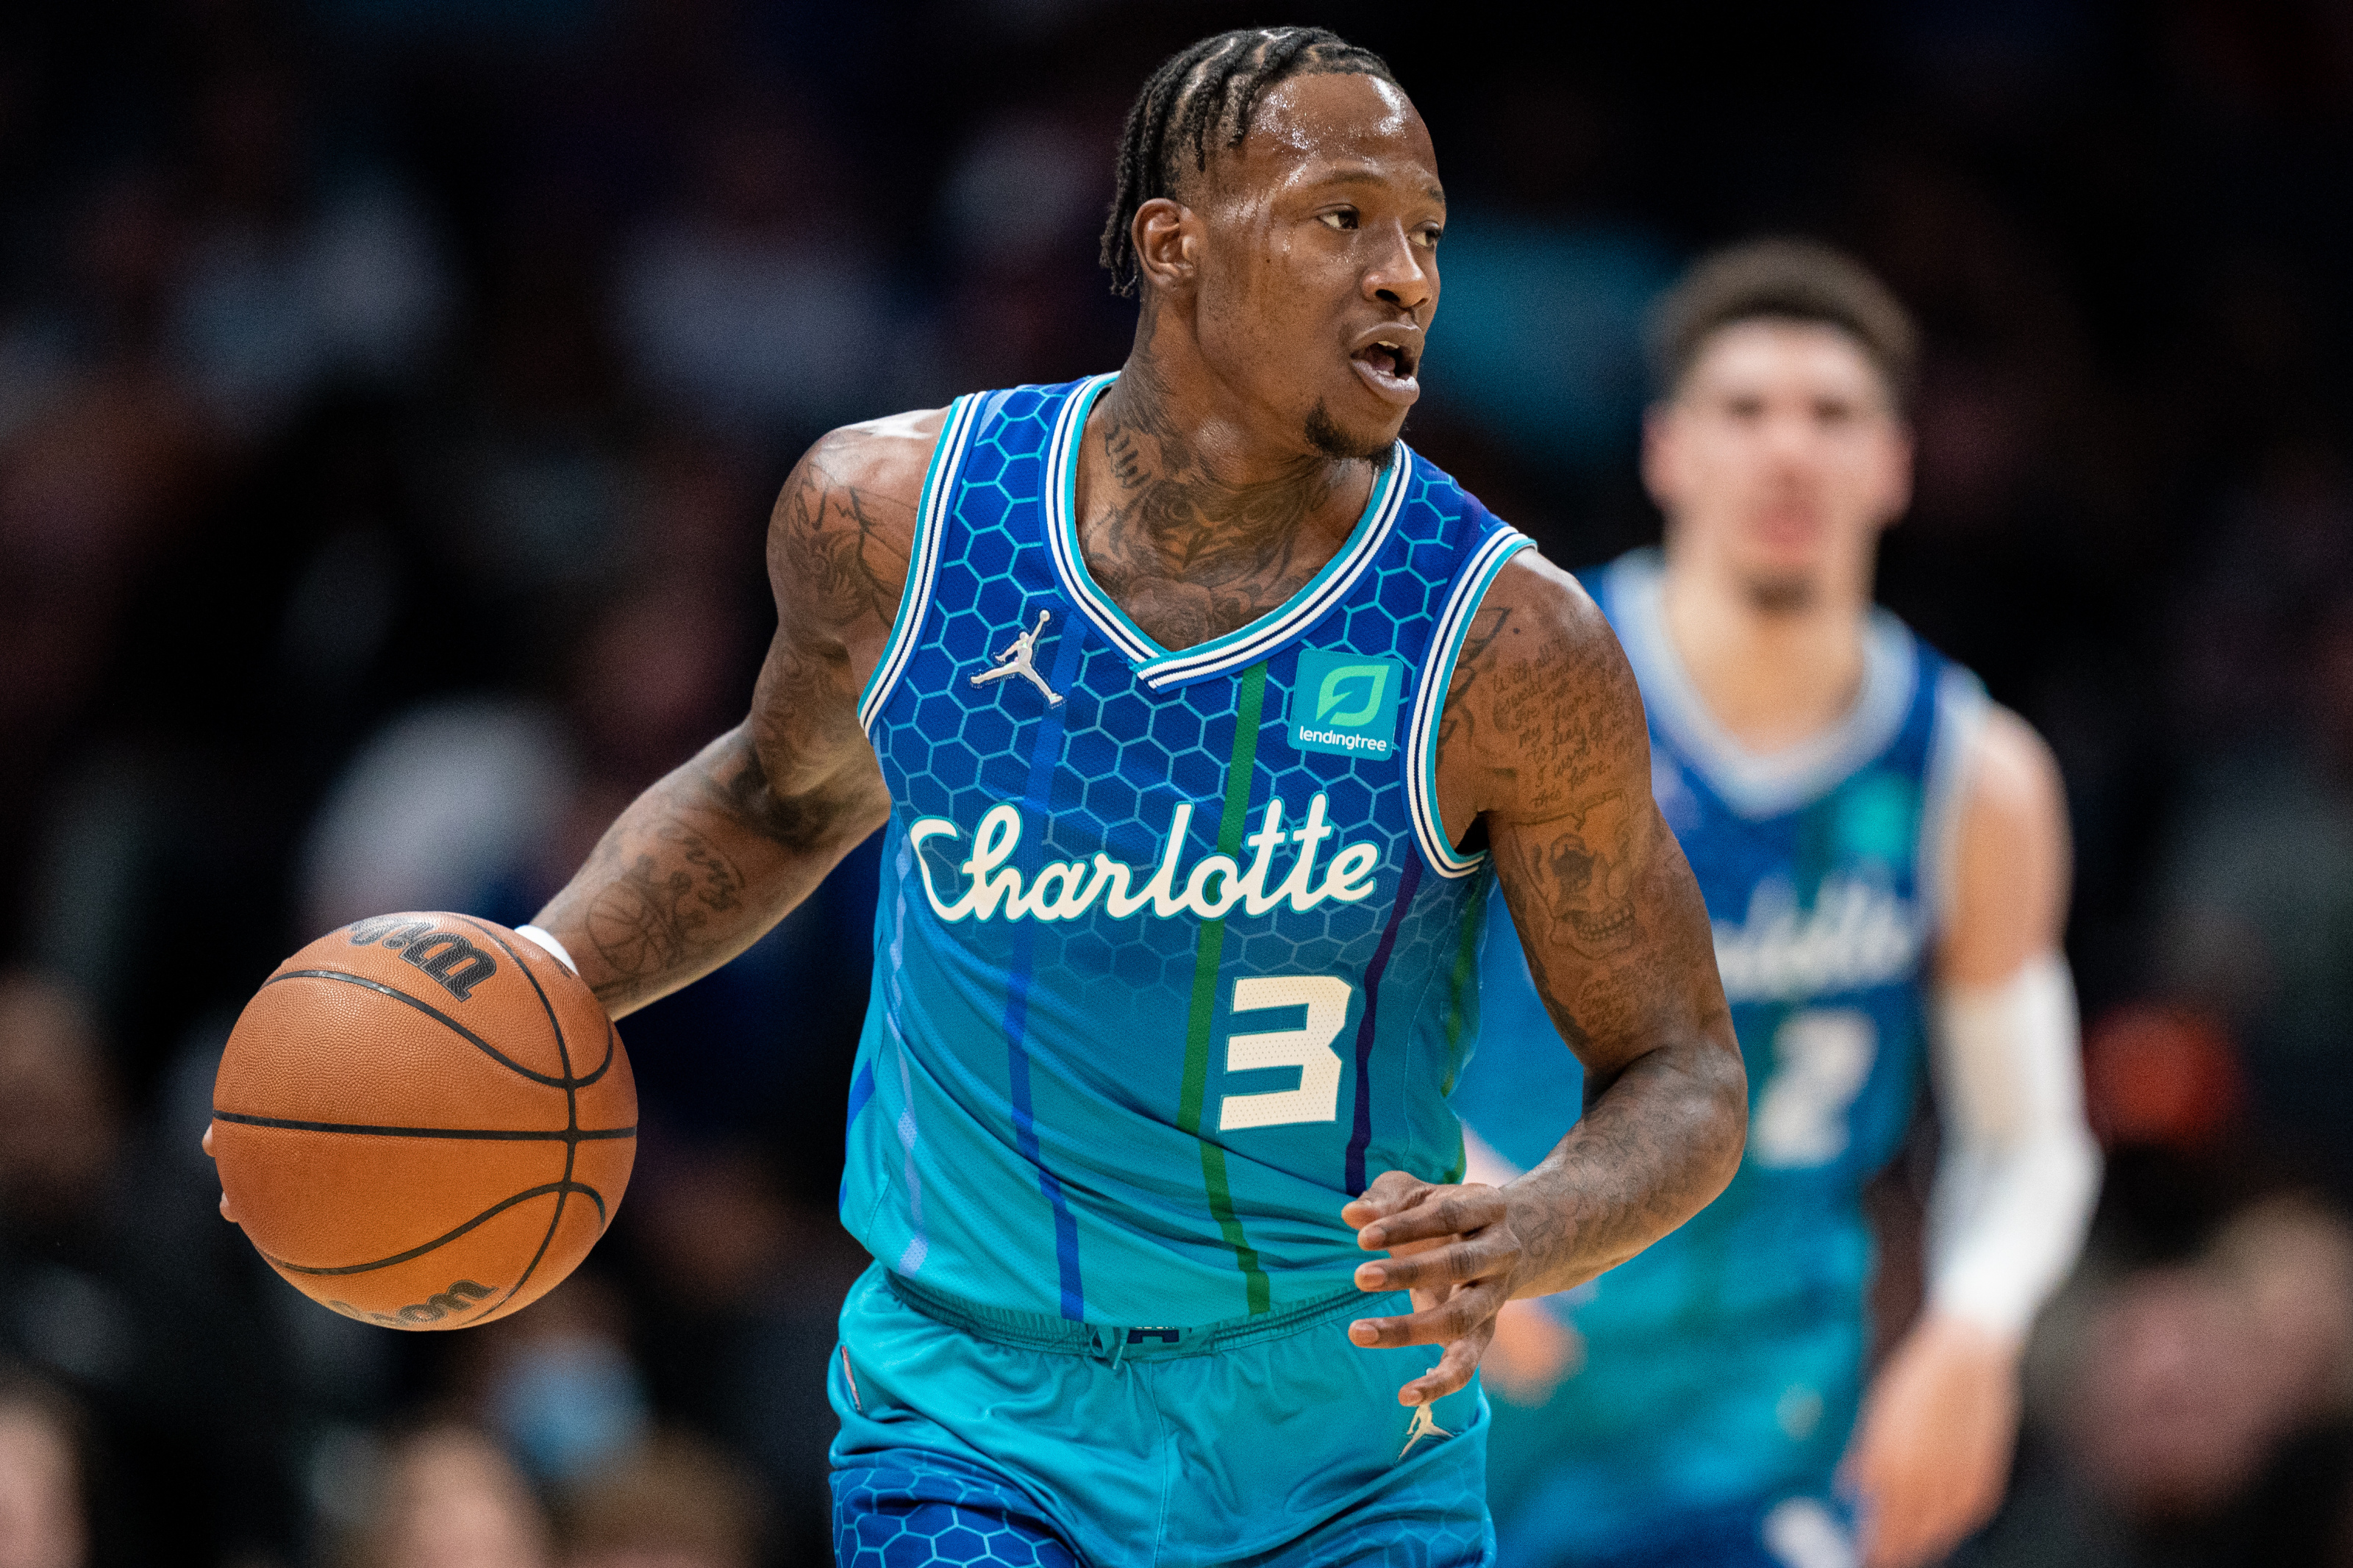 terry rozier hornets jersey